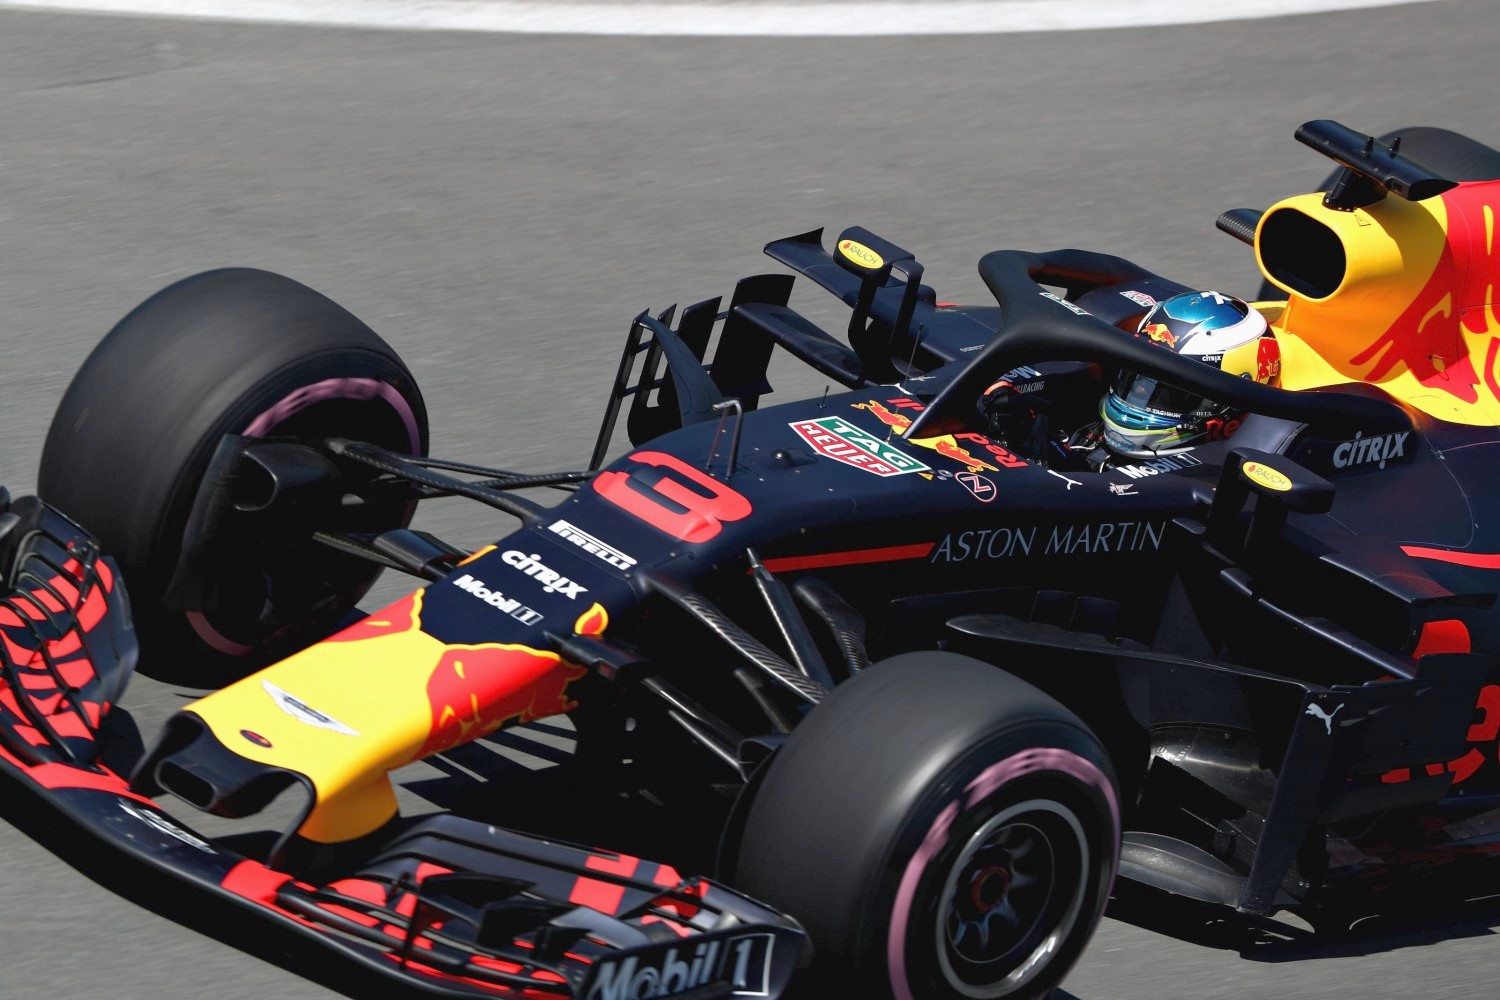 We suspect Red Bull will stick with Renault